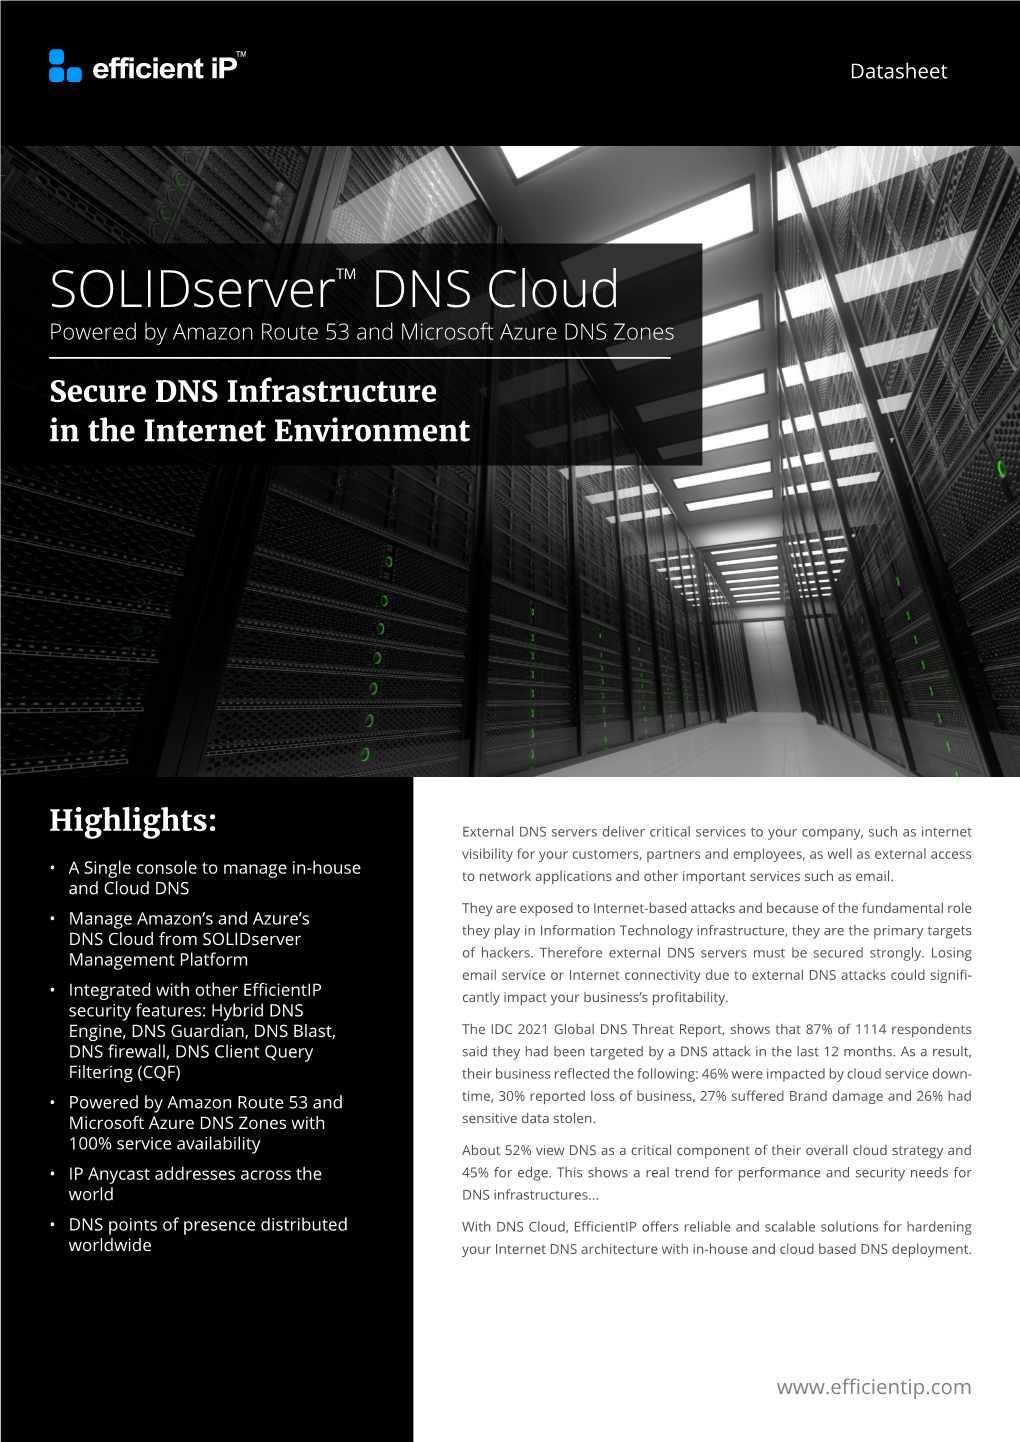 Solidserver™ DNS Cloud Powered by Amazon Route 53 and Microsoft Azure DNS Zones